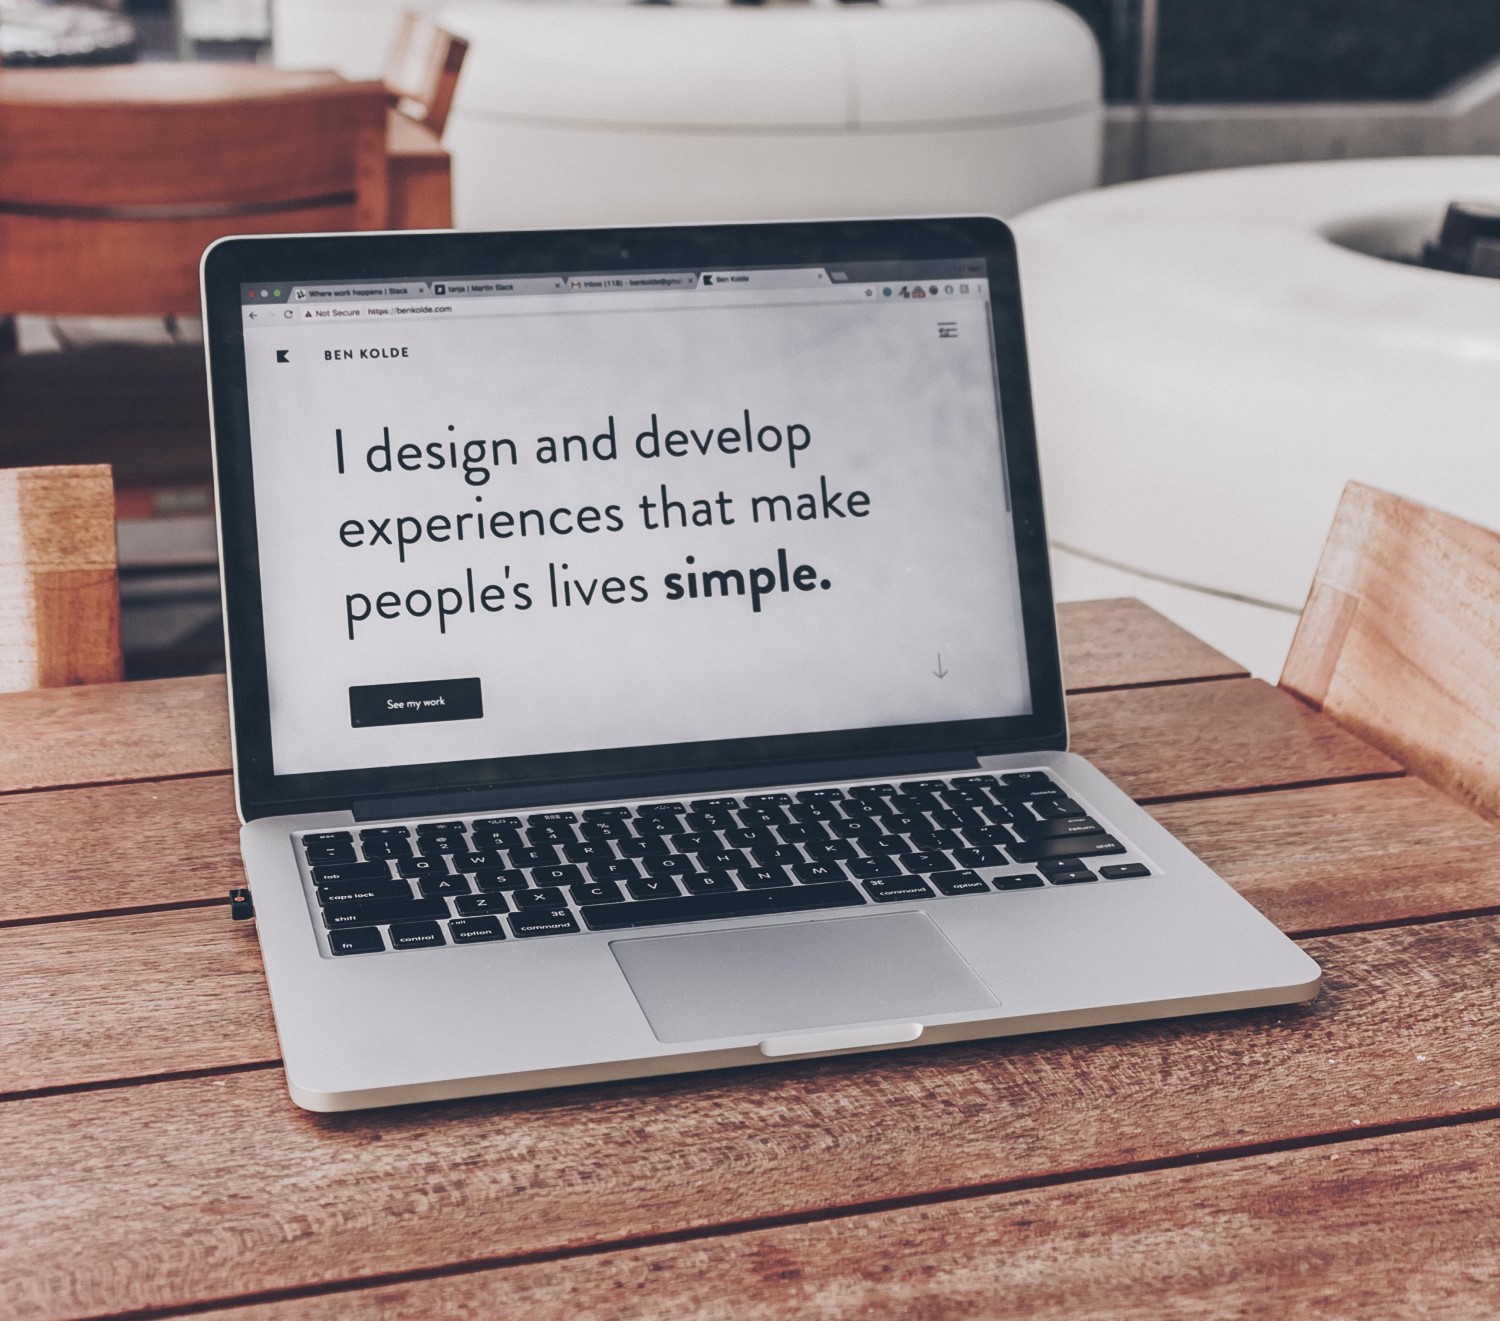 I design and develop experiences that make people's lives simple.